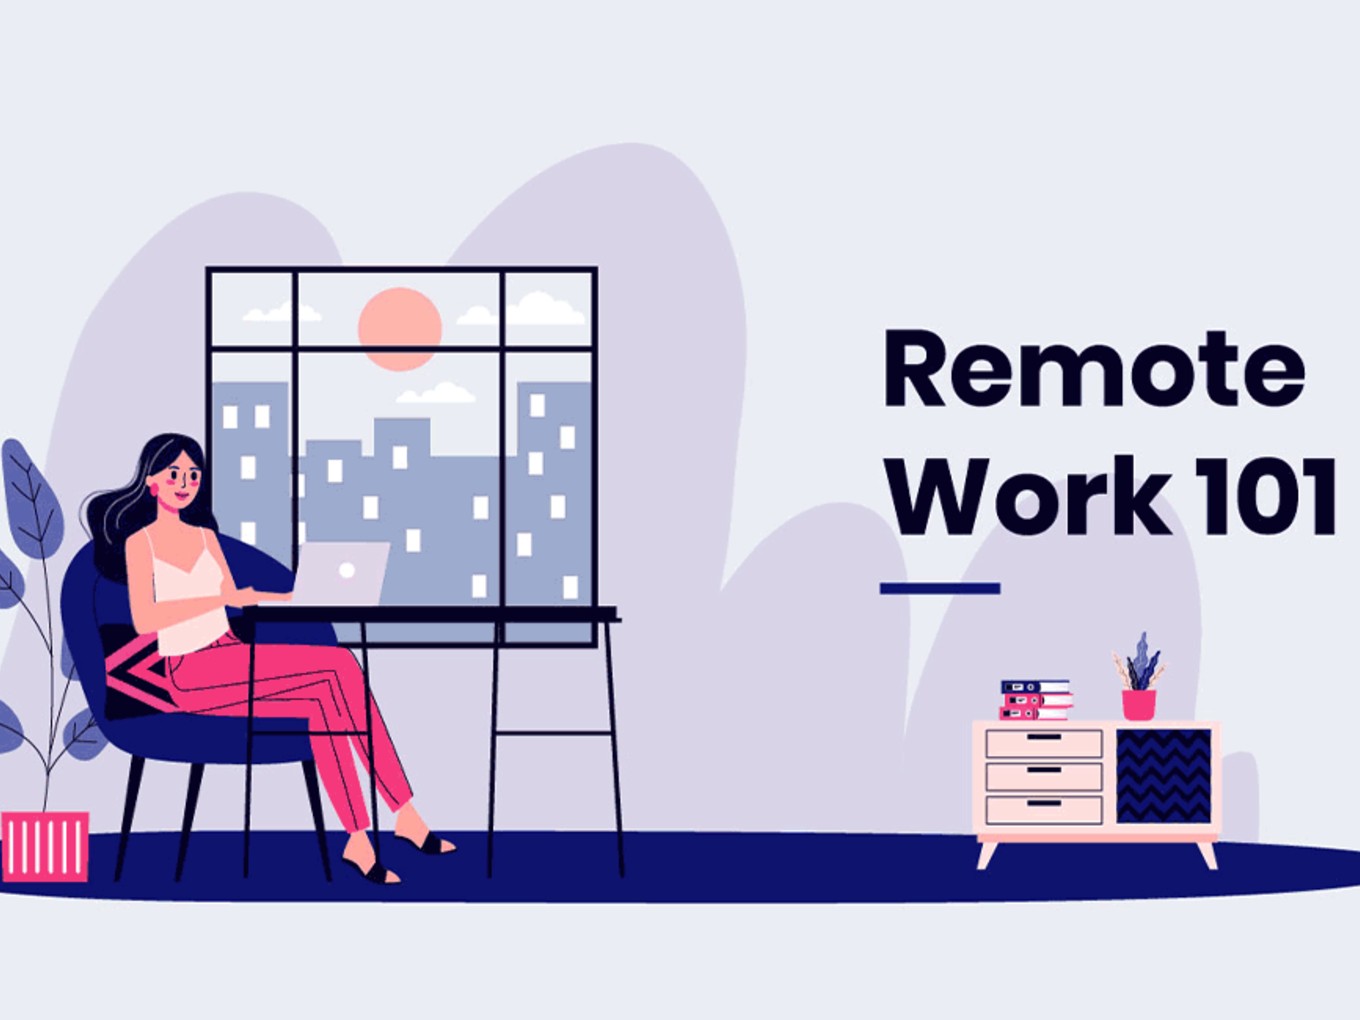 How To Transition To Remote Work In The Face Of Coronavirus Outbreak